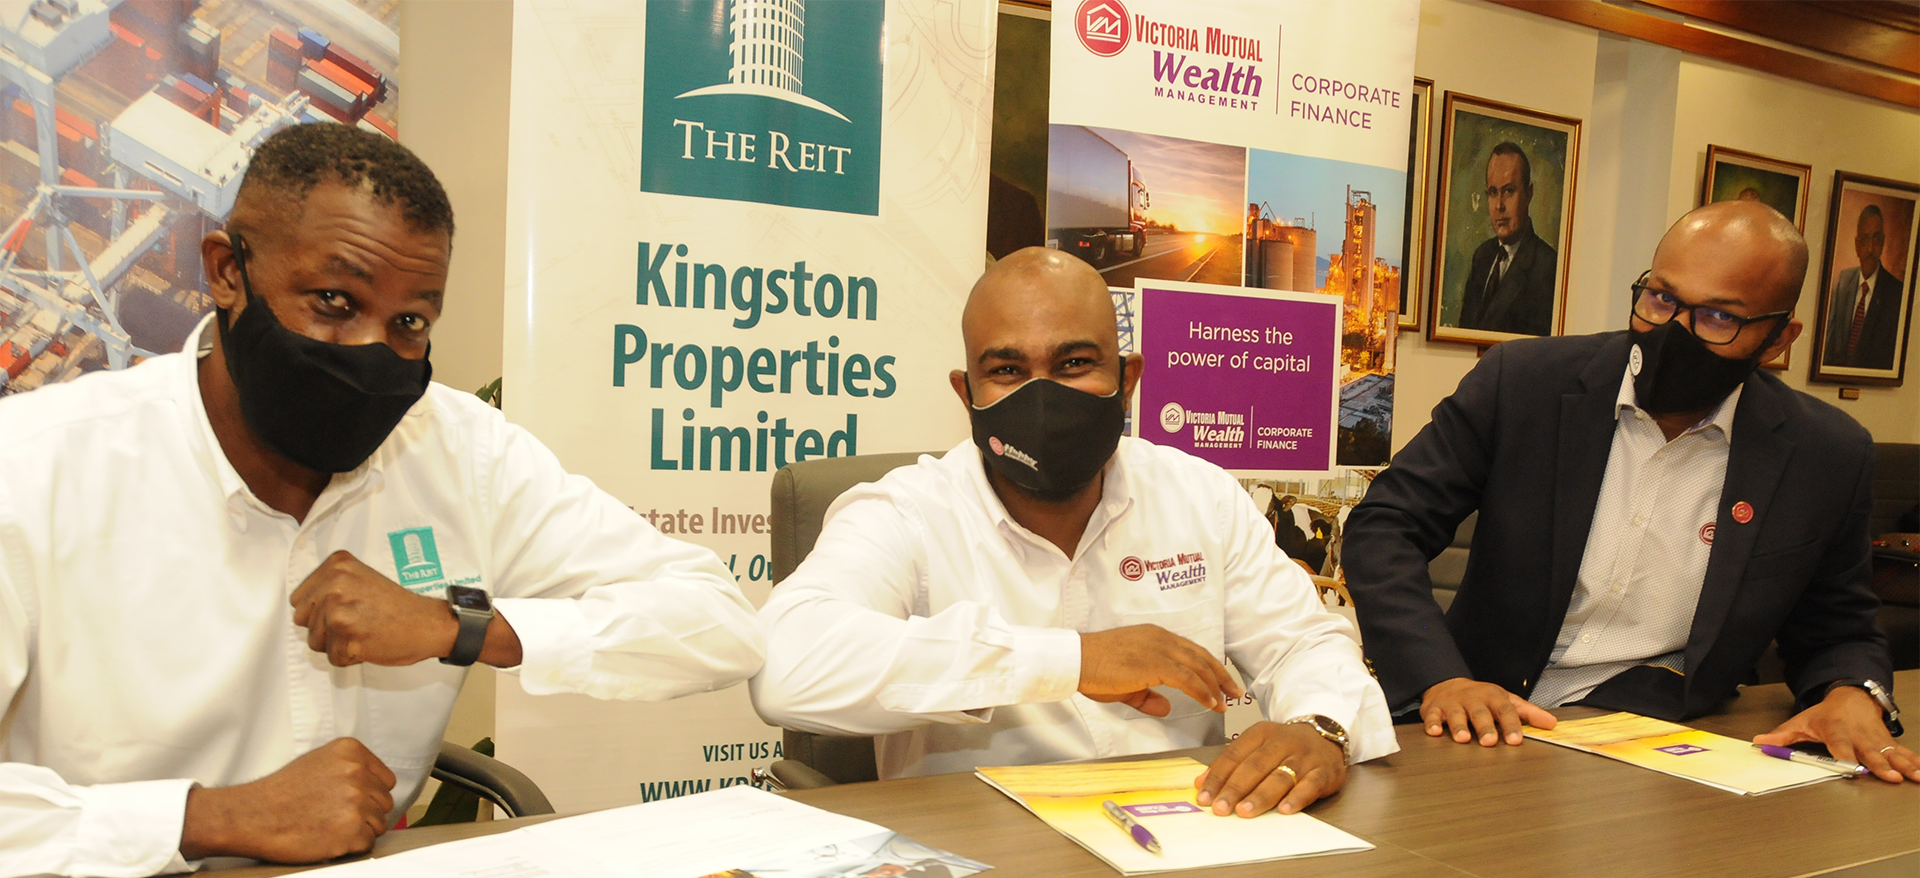 Dwight Jackson (centre), Assistant Vice President, Corporate Finance, Victoria Mutual Wealth Management Ltd., shares a moment with Kevin Richards (left), CEO, Kingston Properties Limited, during a signing ceremony at the Victoria Mutual corporate offices on Friday (May 28). Looking on (at right) is Rezworth Burchenson, CEO, Victoria Mutual Investments Limited (VMIL) & VM Wealth. The ceremony was used to commemorate the completion of a $700 million bridge loan deal between VMIL and Kingston Properties.